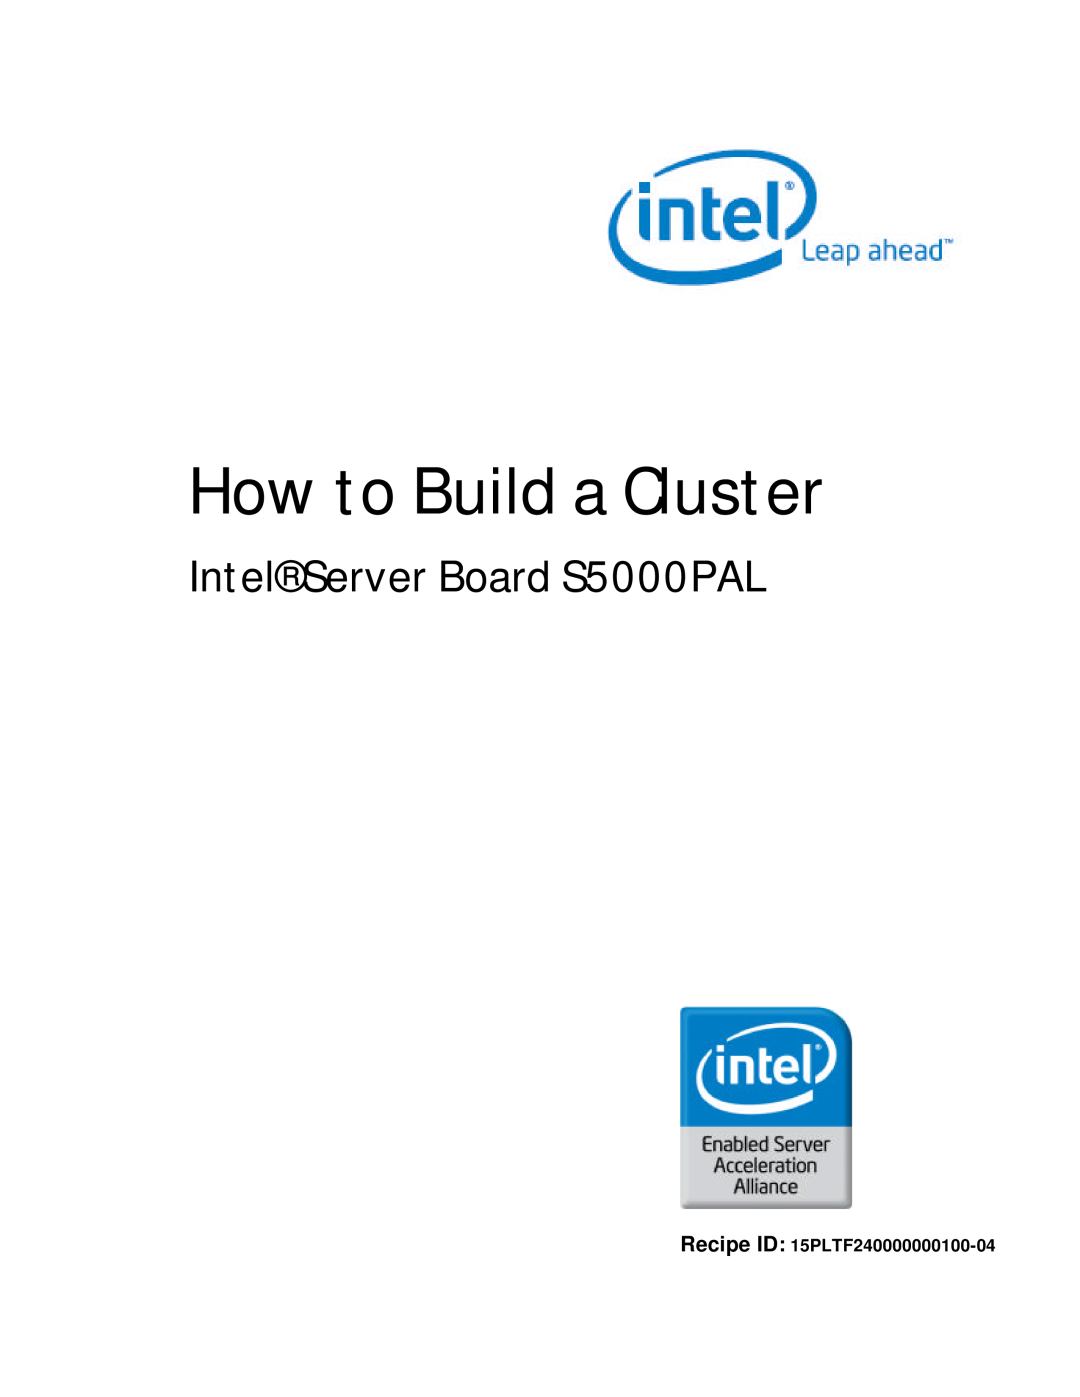 Intel manual How to Build a Cluster, Intel Server Board S5000PAL, Recipe ID 15PLTF240000000100-04 